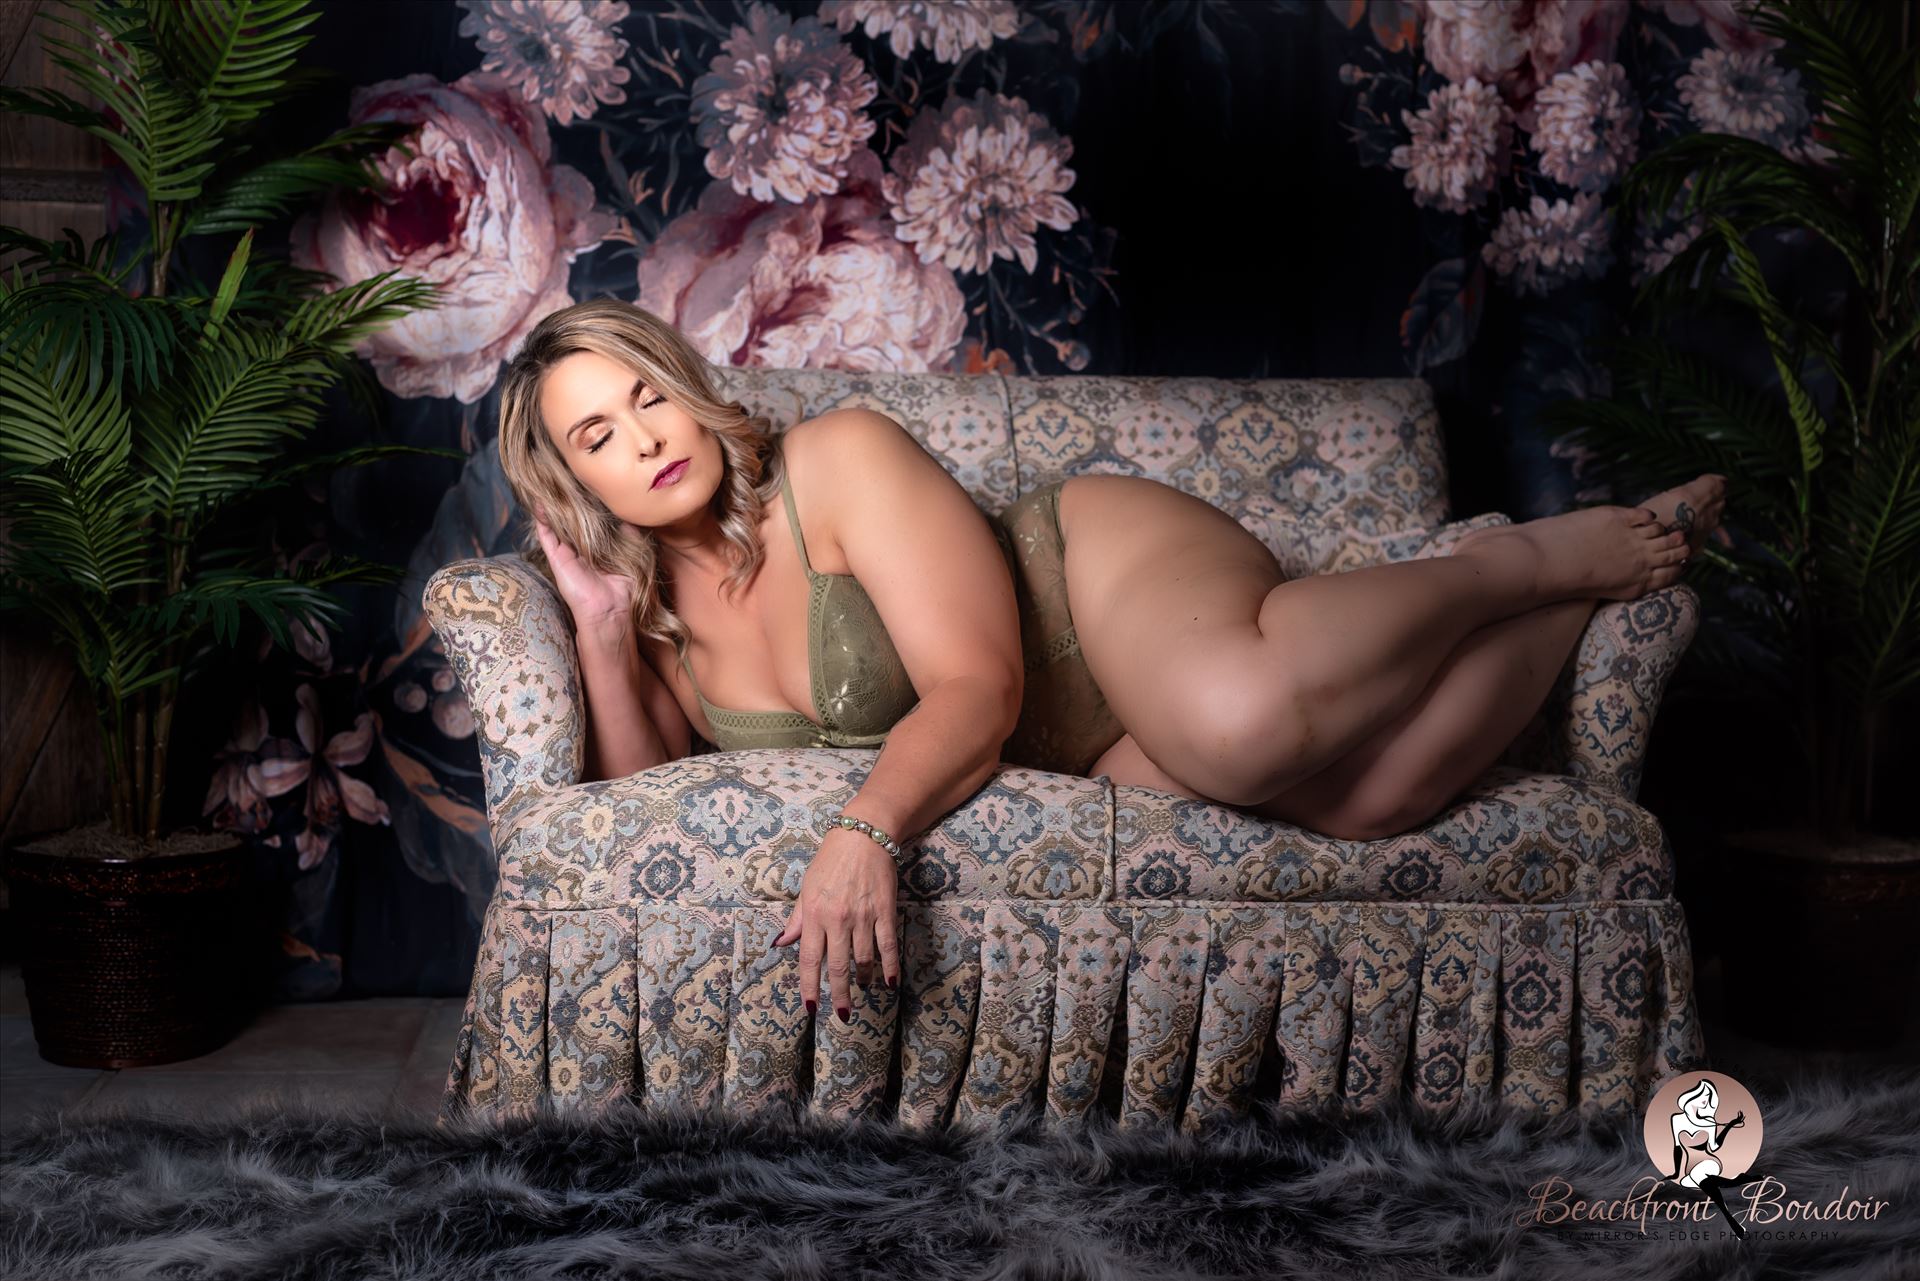 Port-2283.JPG Beachfront Boudoir by Mirror's Edge Photography is a Boutique Luxury Boudoir Photography Studio located just blocks from the beach in Oceano, California. My mission is to show as many women as possible how beautiful they truly are! by Sarah Williams